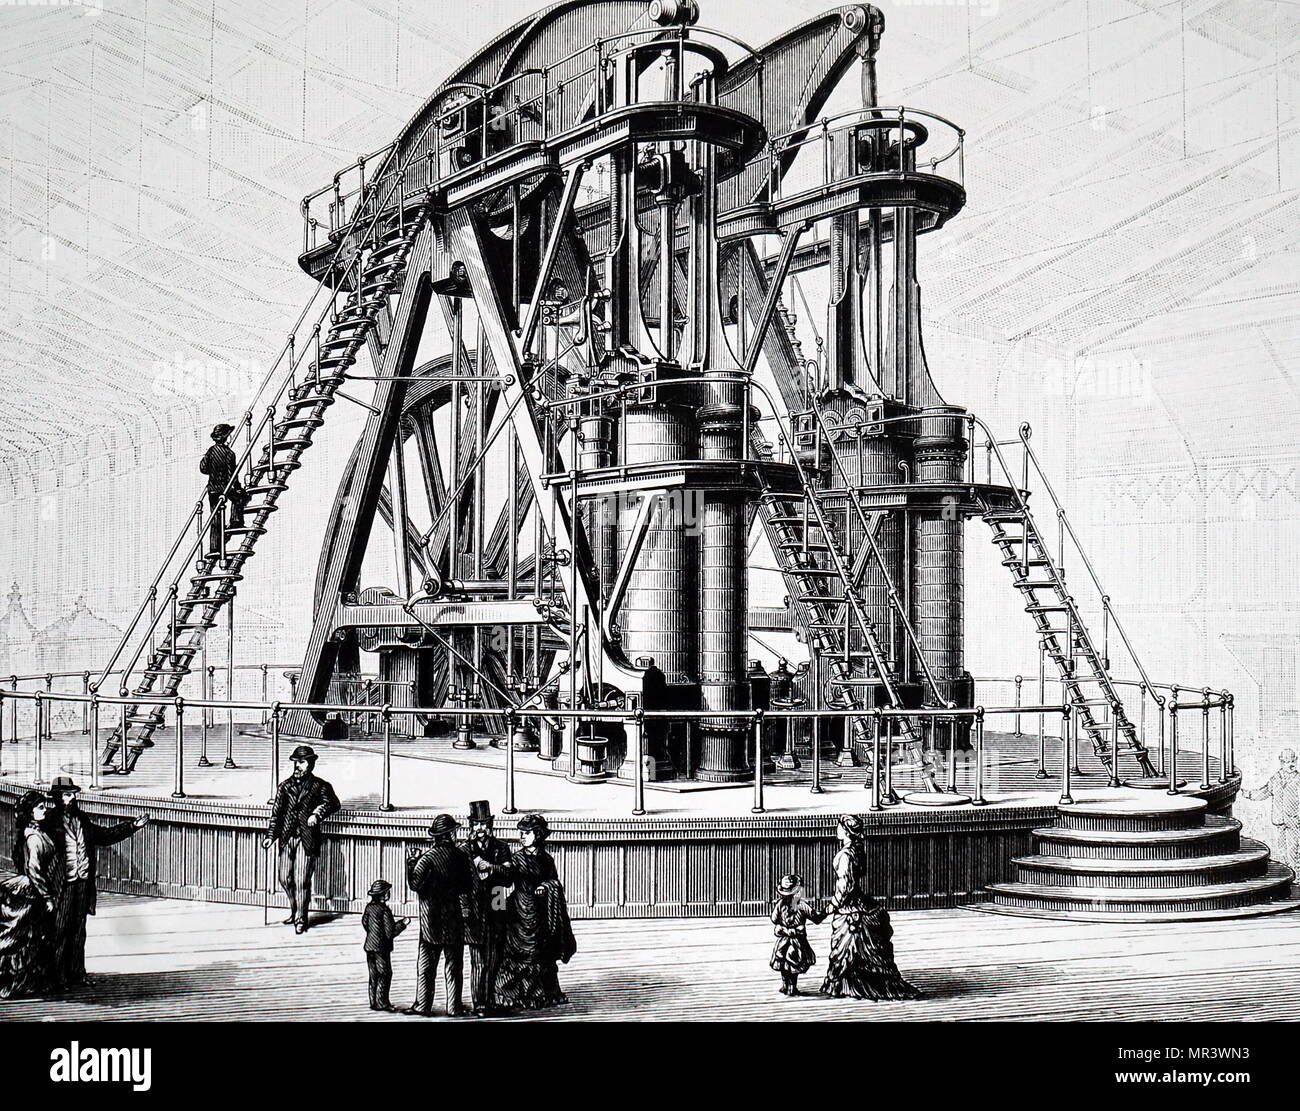 Illustration depicting a beam engine with compound cylinders. Dated 19th century Stock Photo